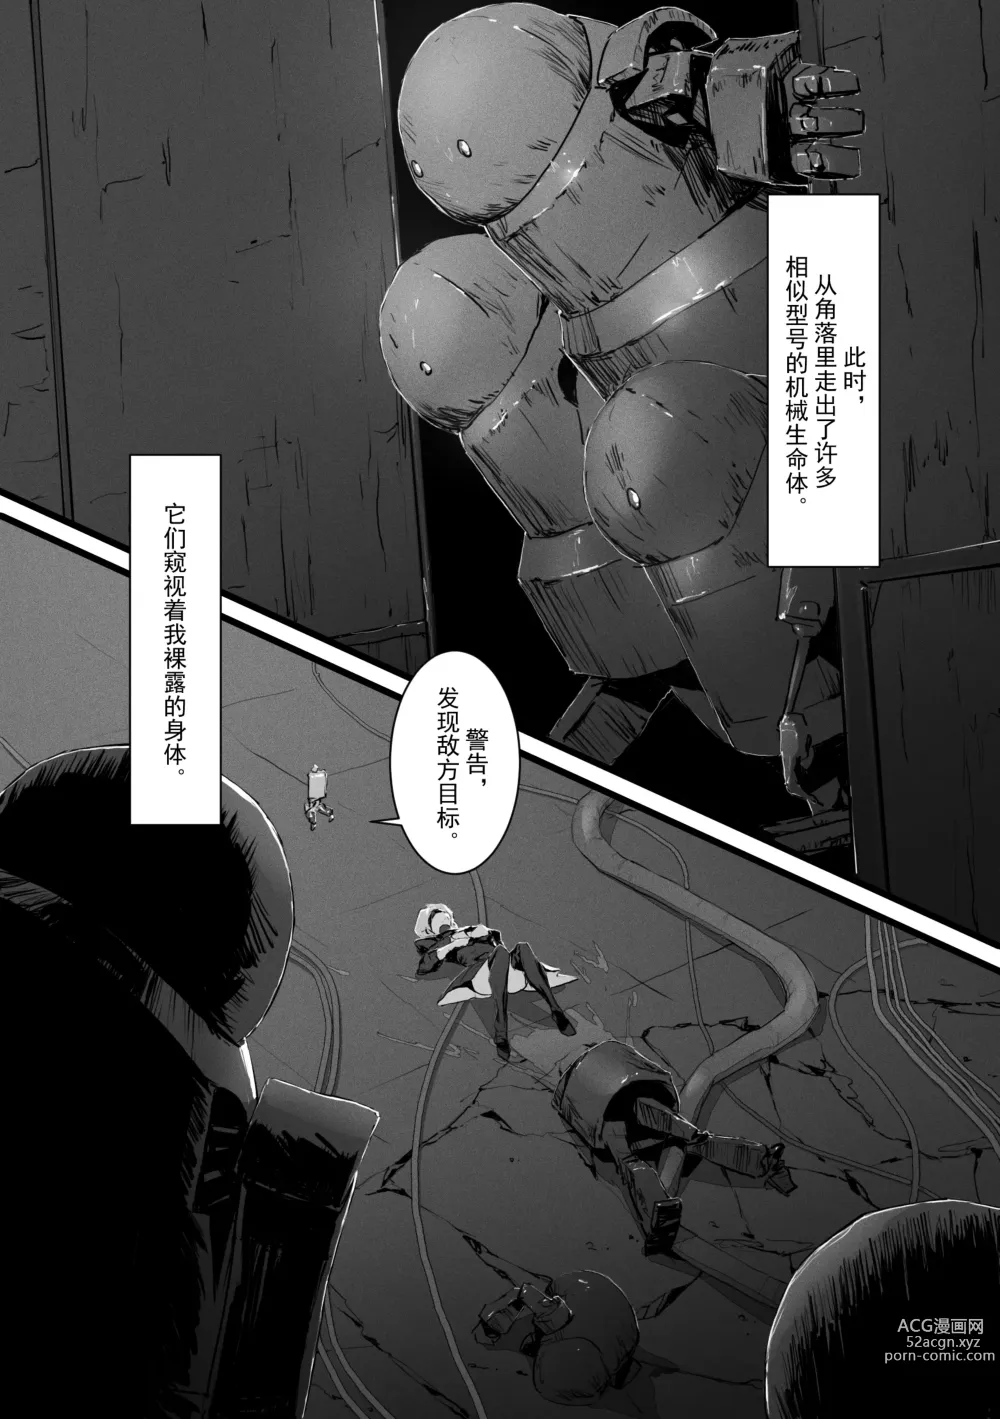 Page 9 of doujinshi 2B In Trouble Part 1-6